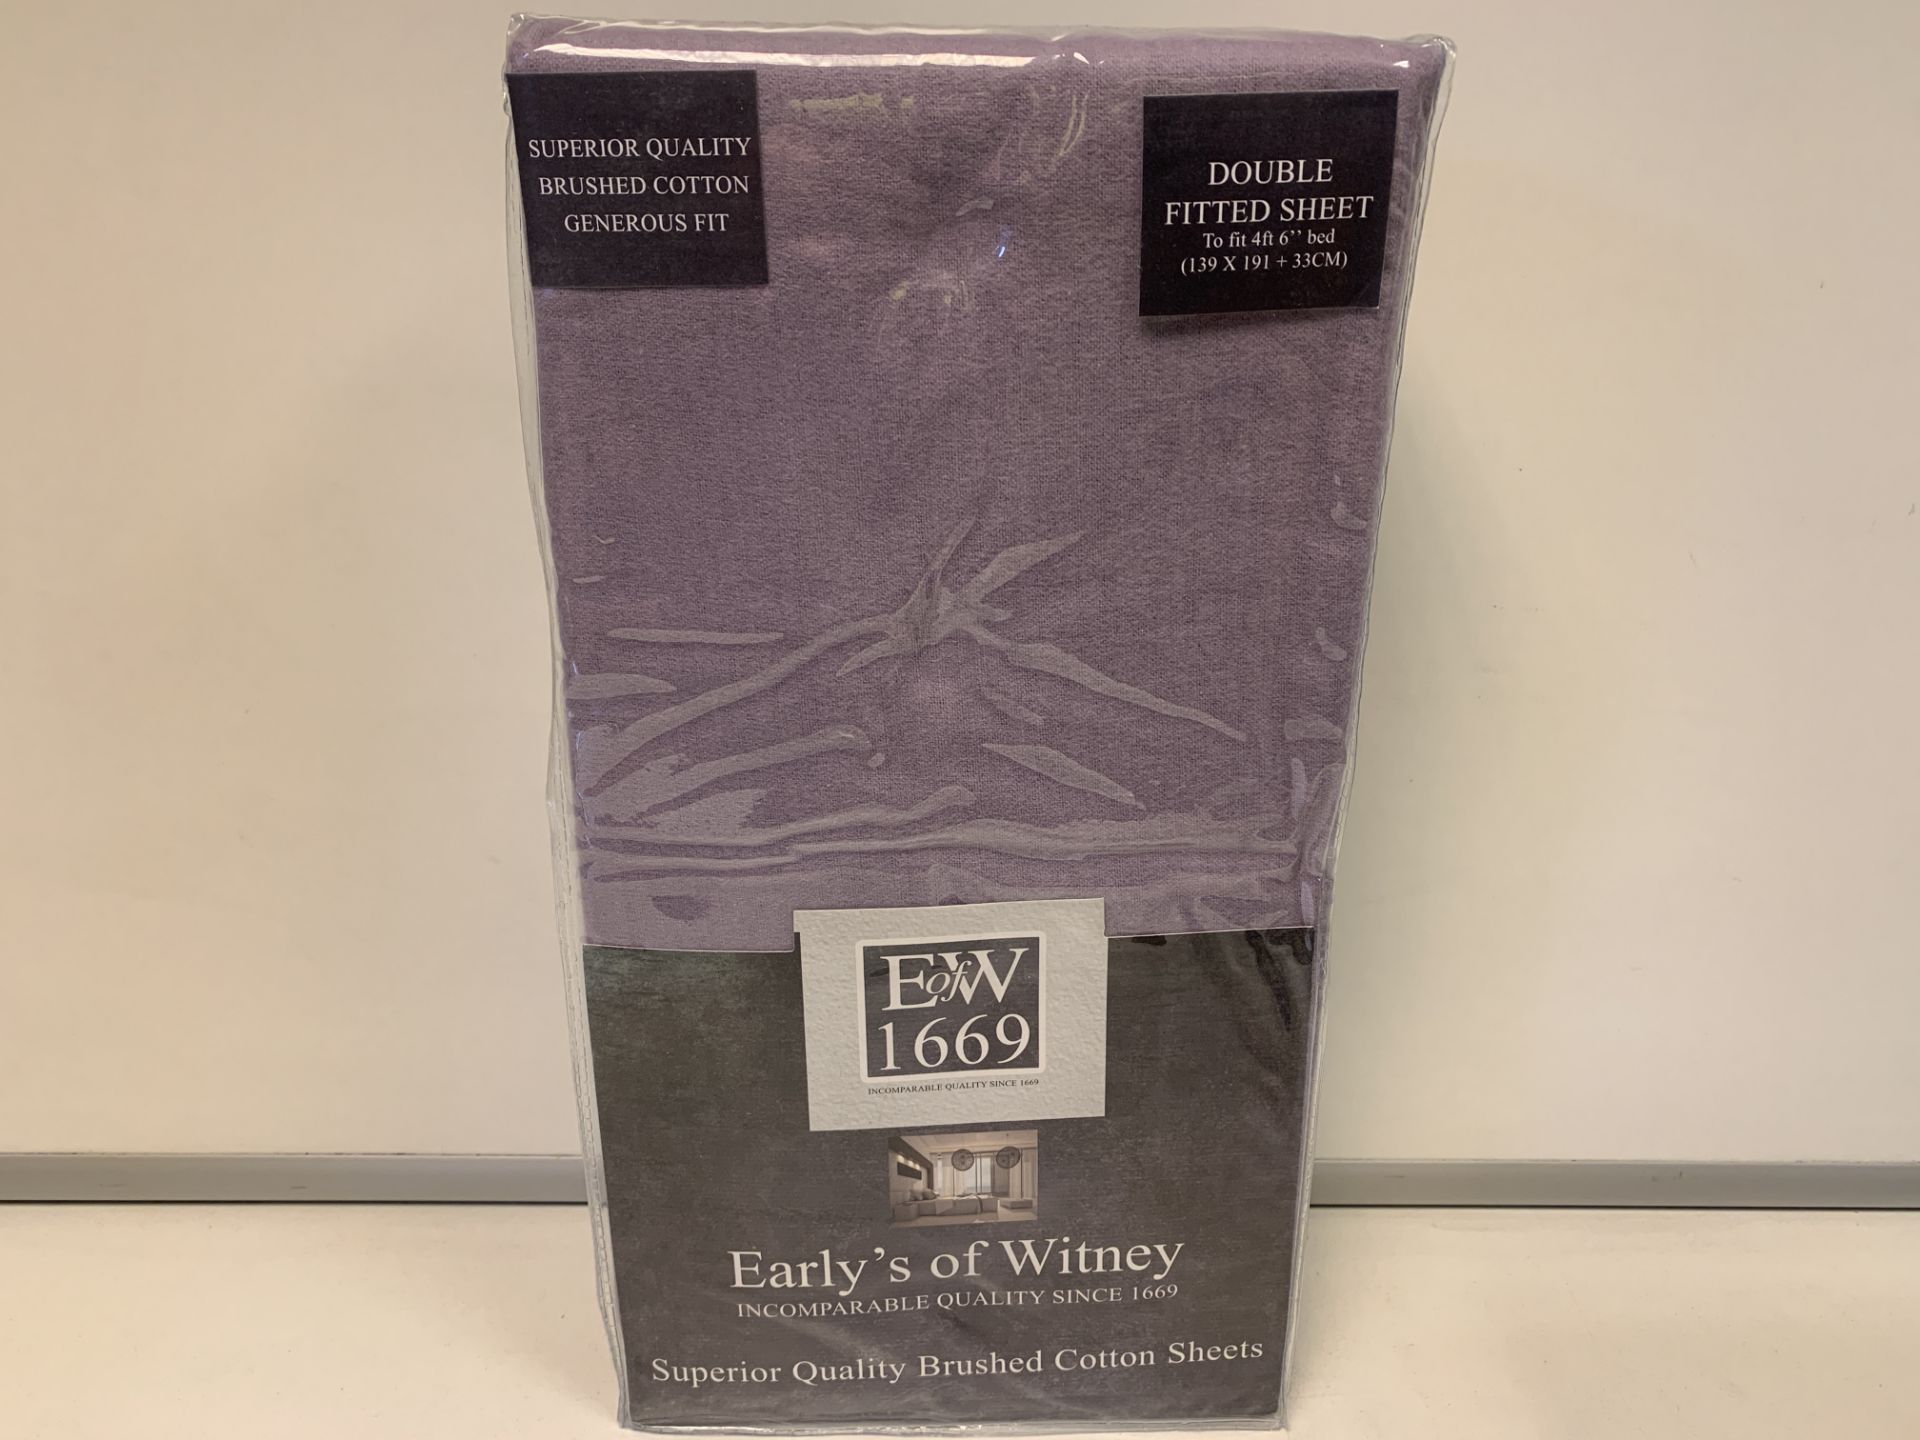 10 X BRAND NEW EARLYS OF WITNEY SUPERIOR QUALITY BRUSHED COTTON SHEETS DOUBLE